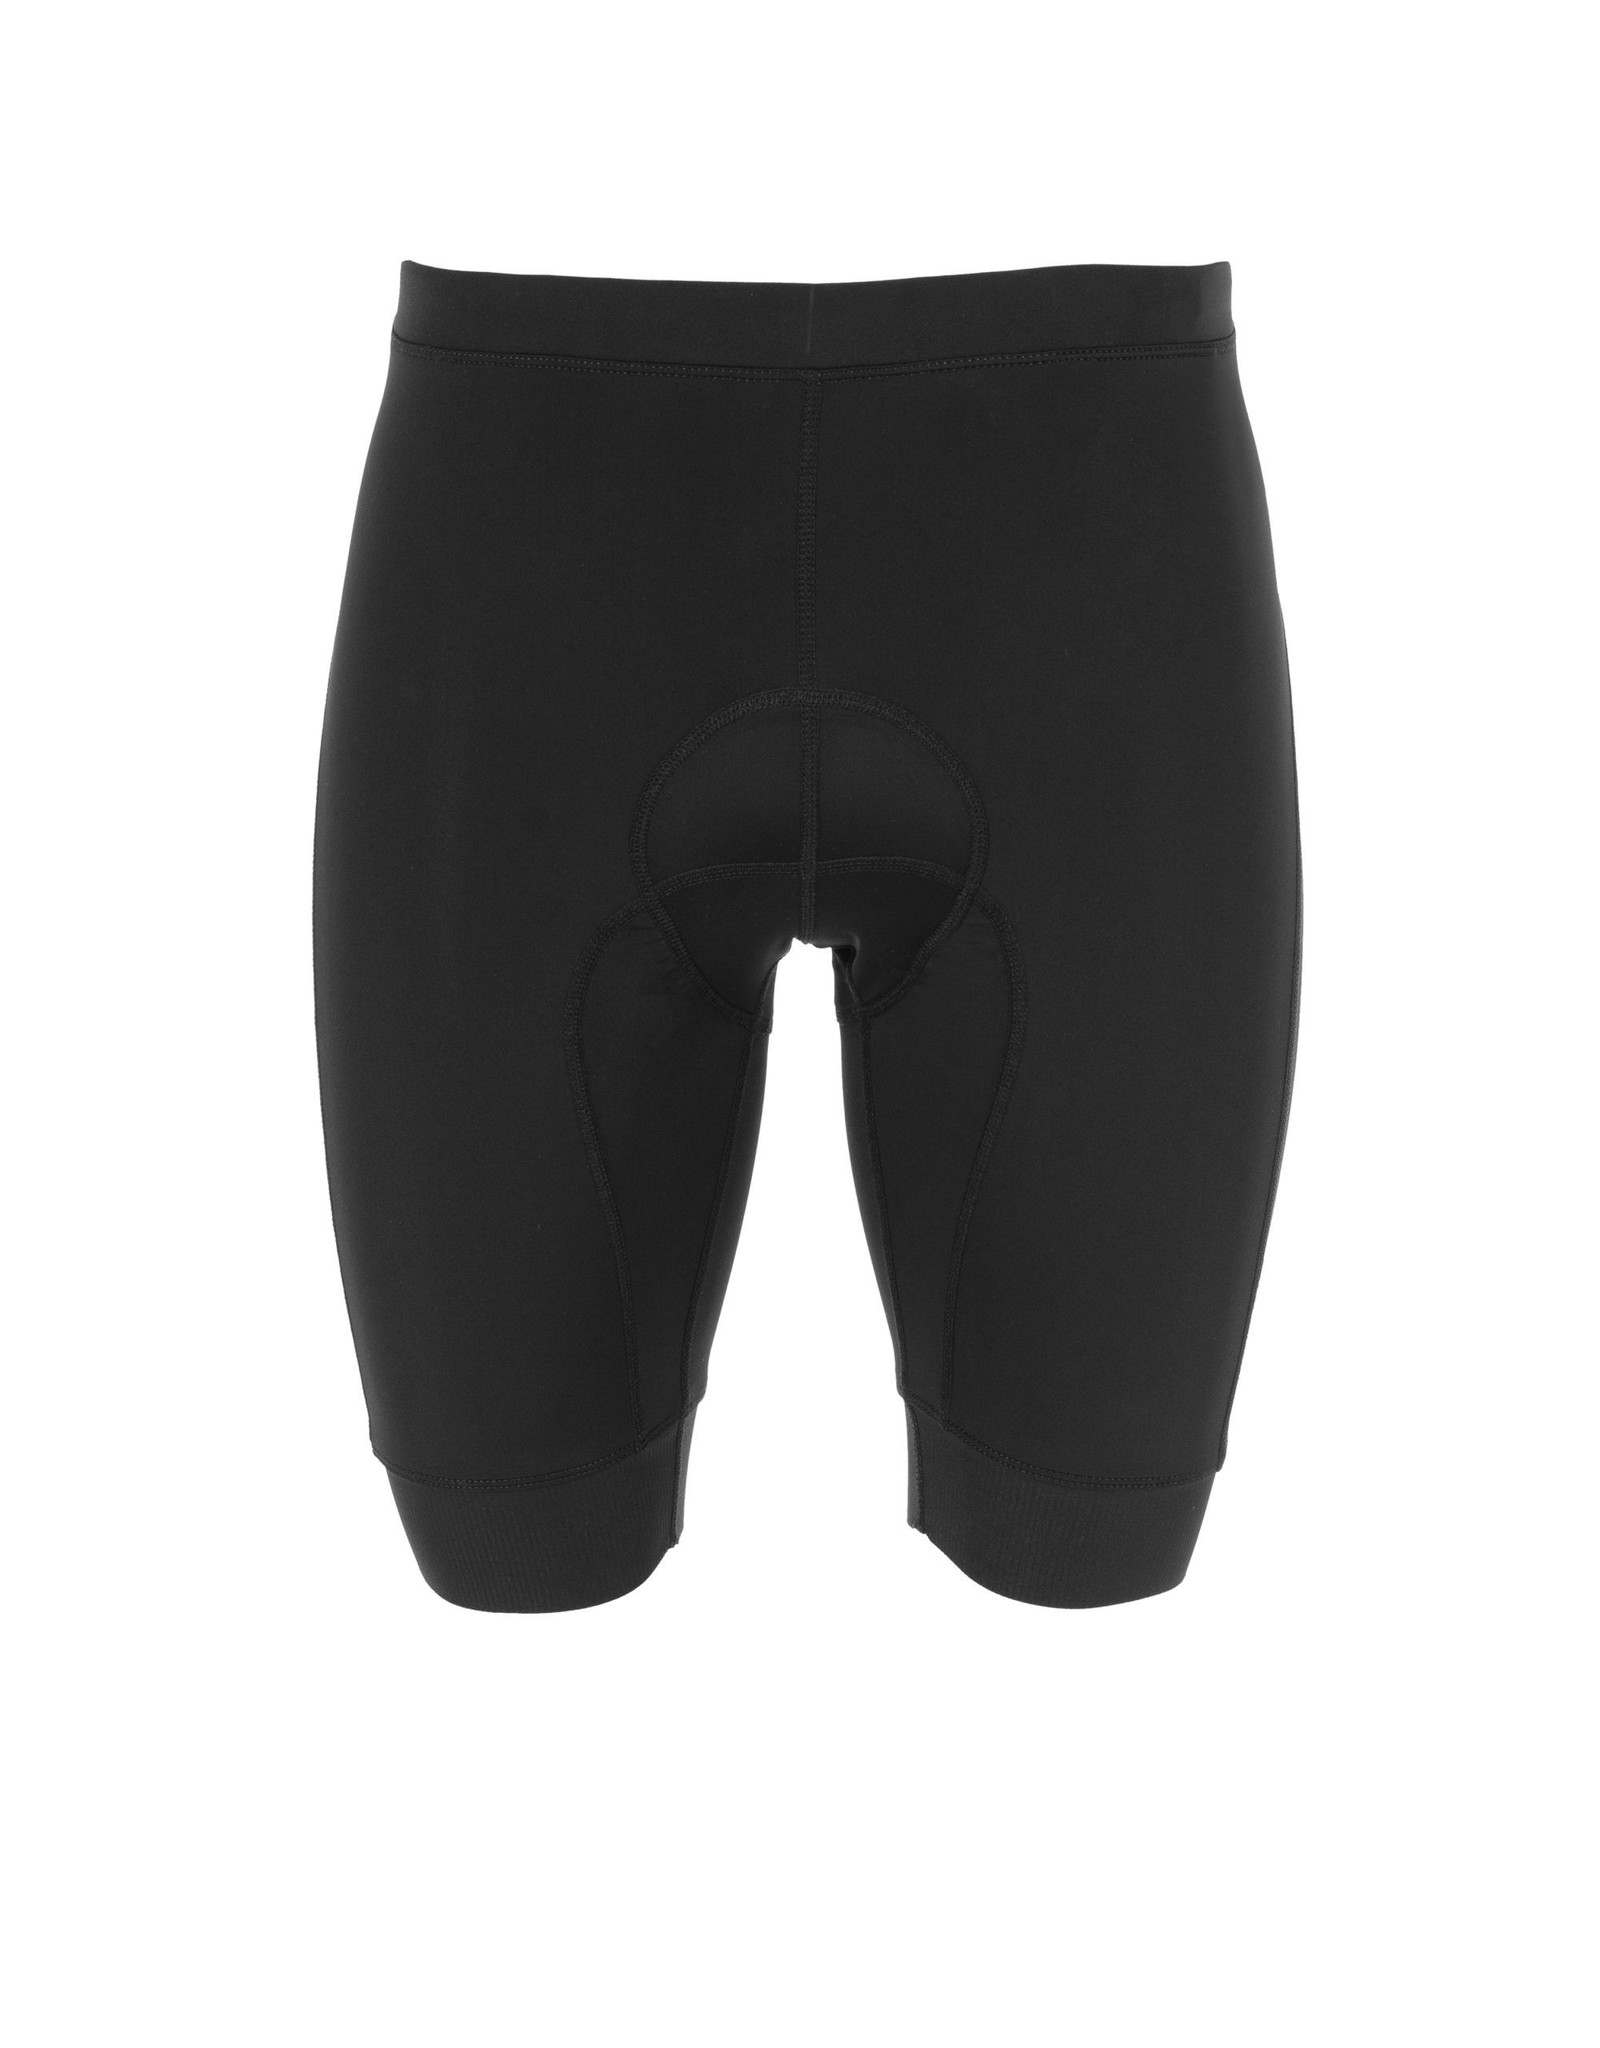 Stanno Functionals Cycling Shorts-Black